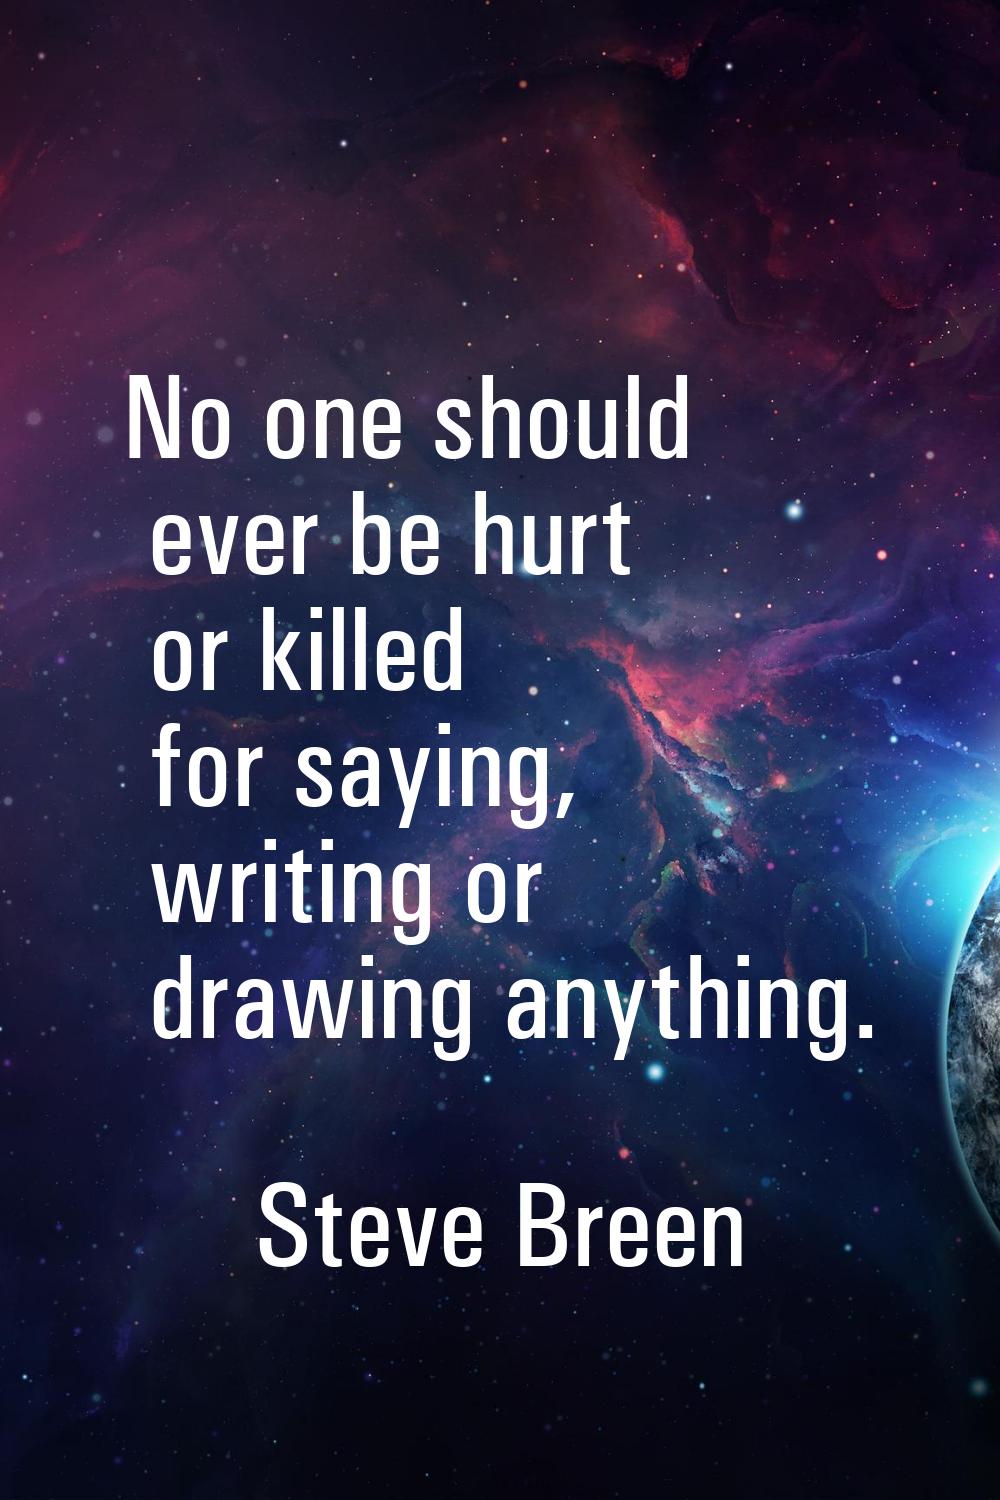 No one should ever be hurt or killed for saying, writing or drawing anything.